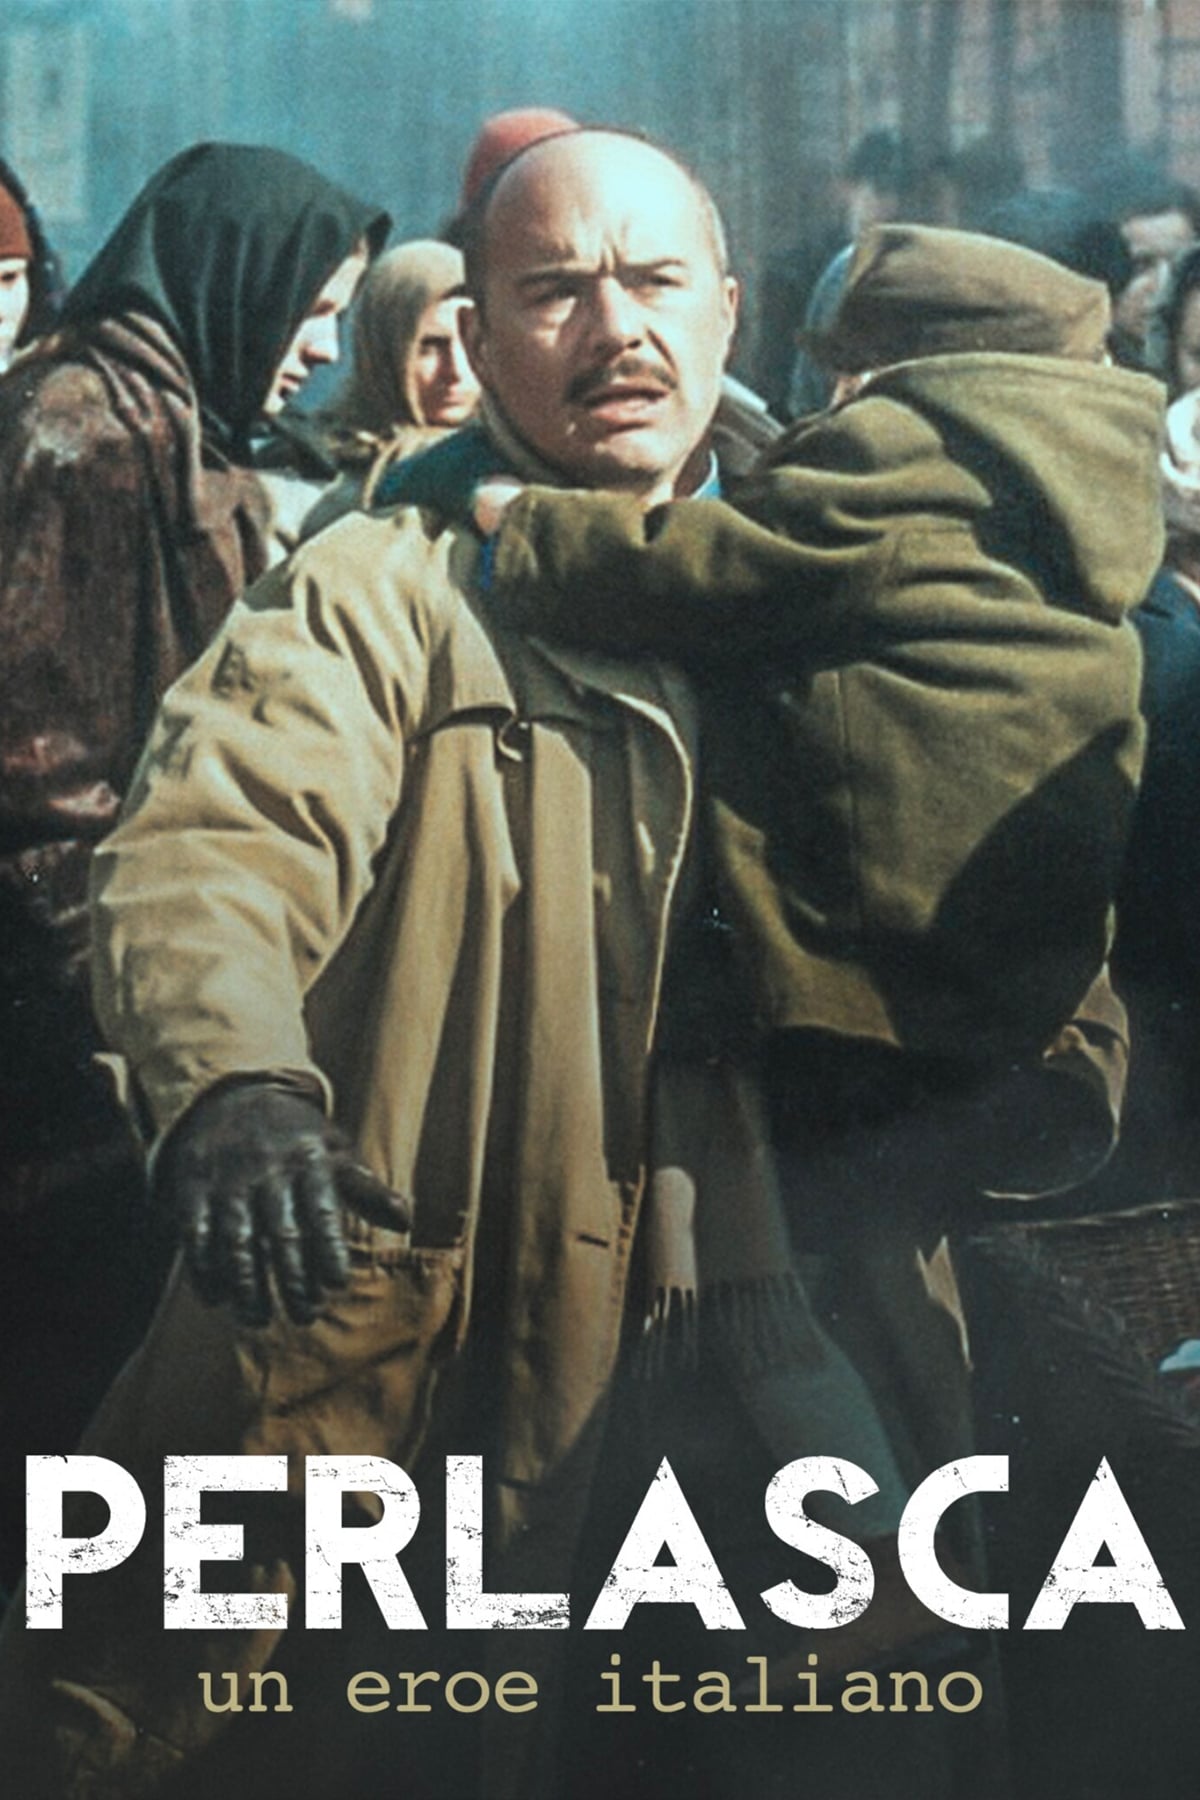 Perlasca: The Courage of a Just Man (2002)